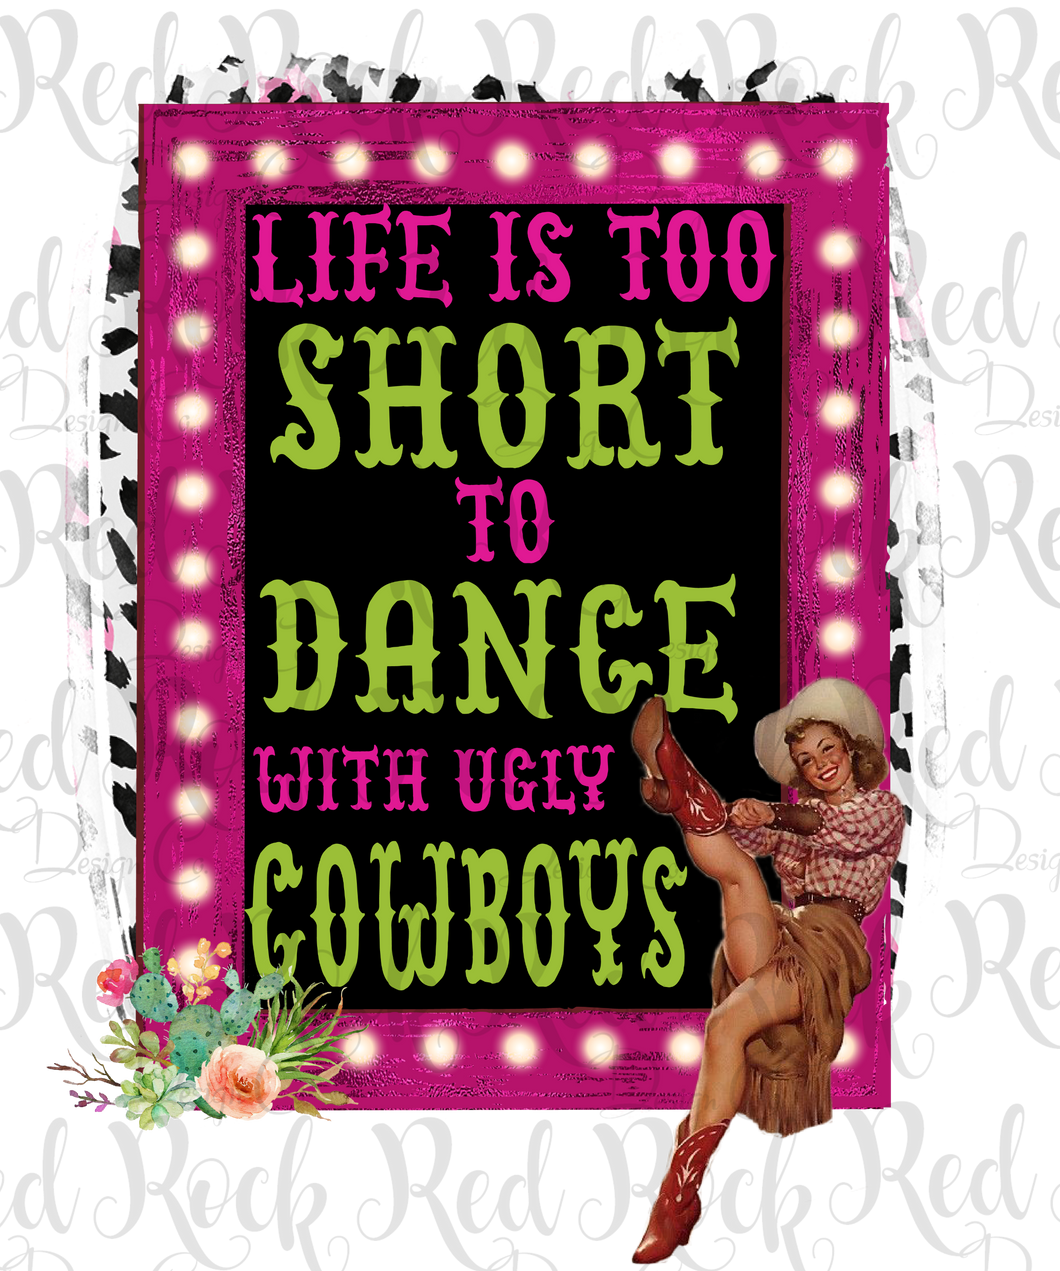 Life is to short to dance with ugly cowboys